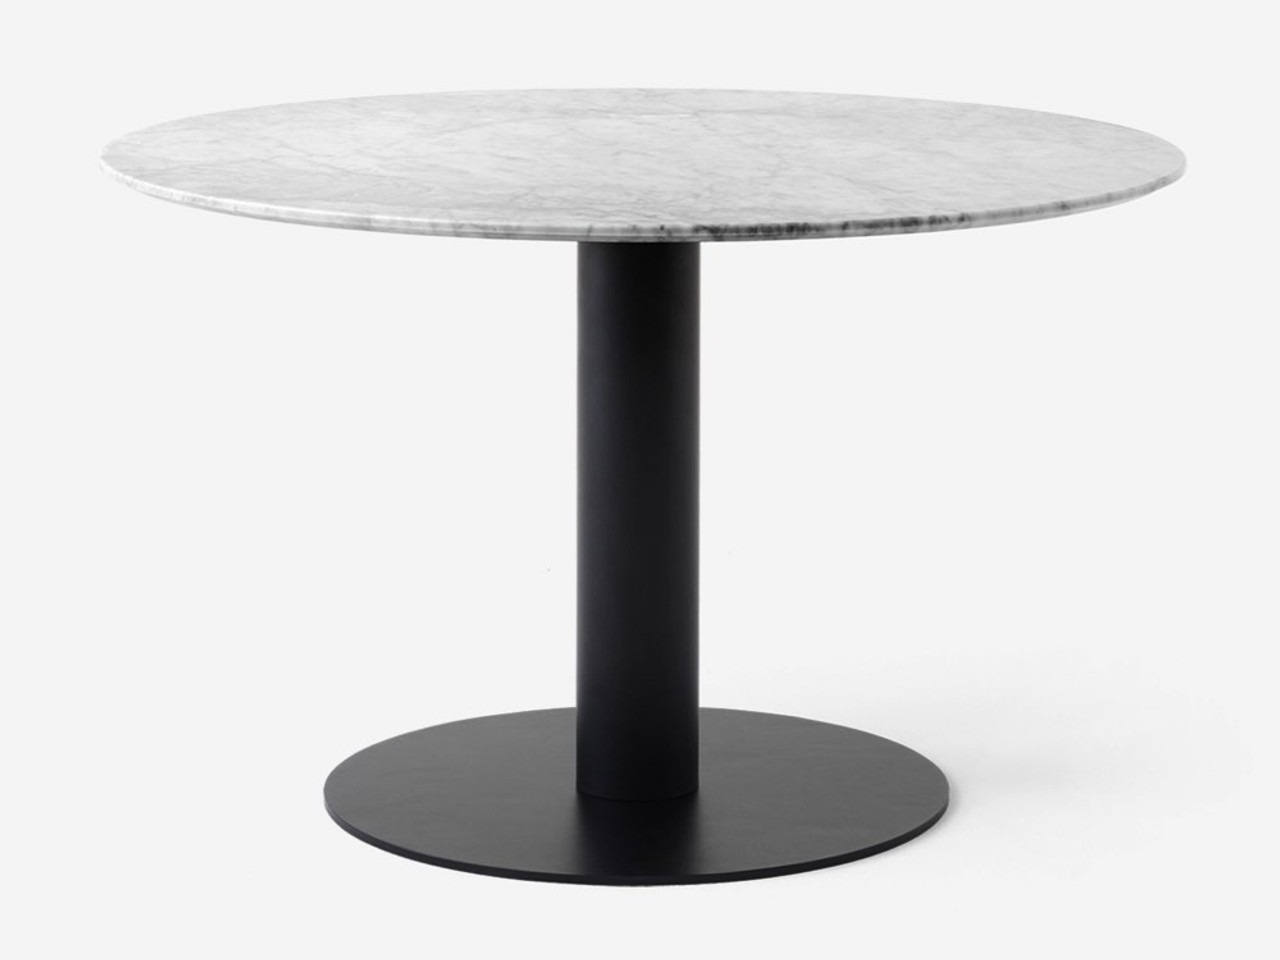 &Tradition In Between SK19 Dining Table by Jaime Hayon